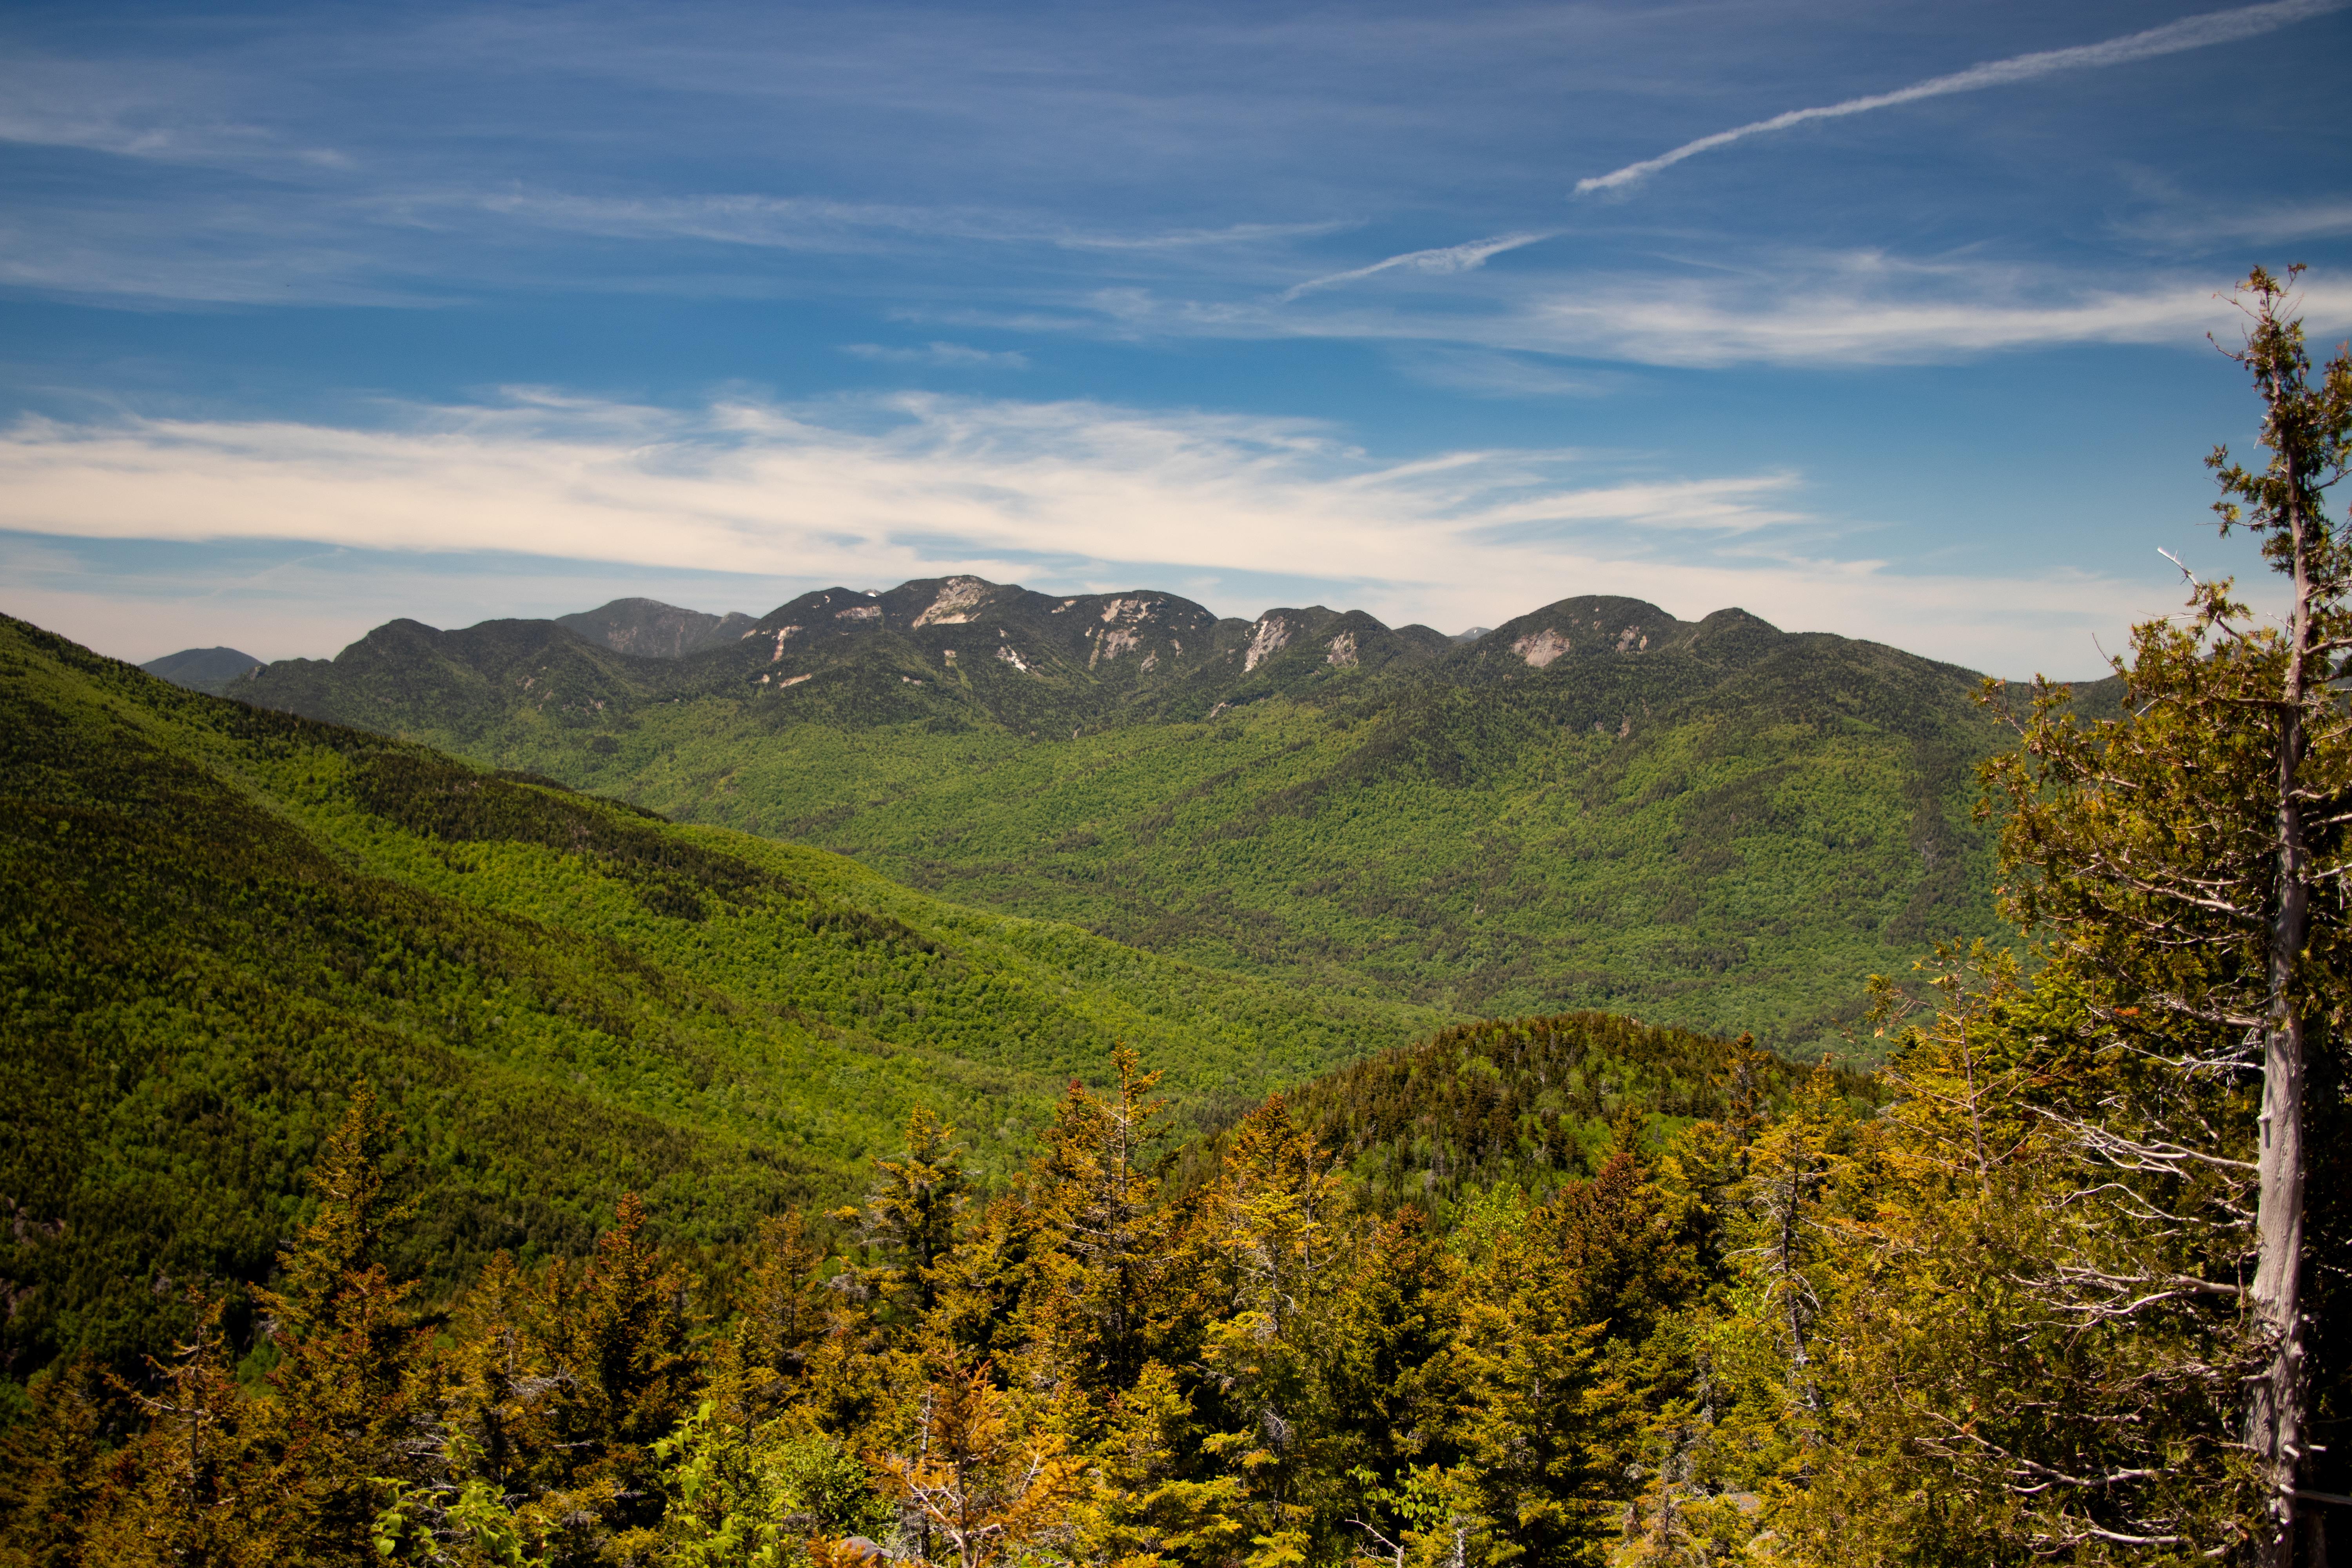 In the face of climate change, protecting the vast forests of the Adirondacks provides carbon sequestration and protected habitat for an array of species